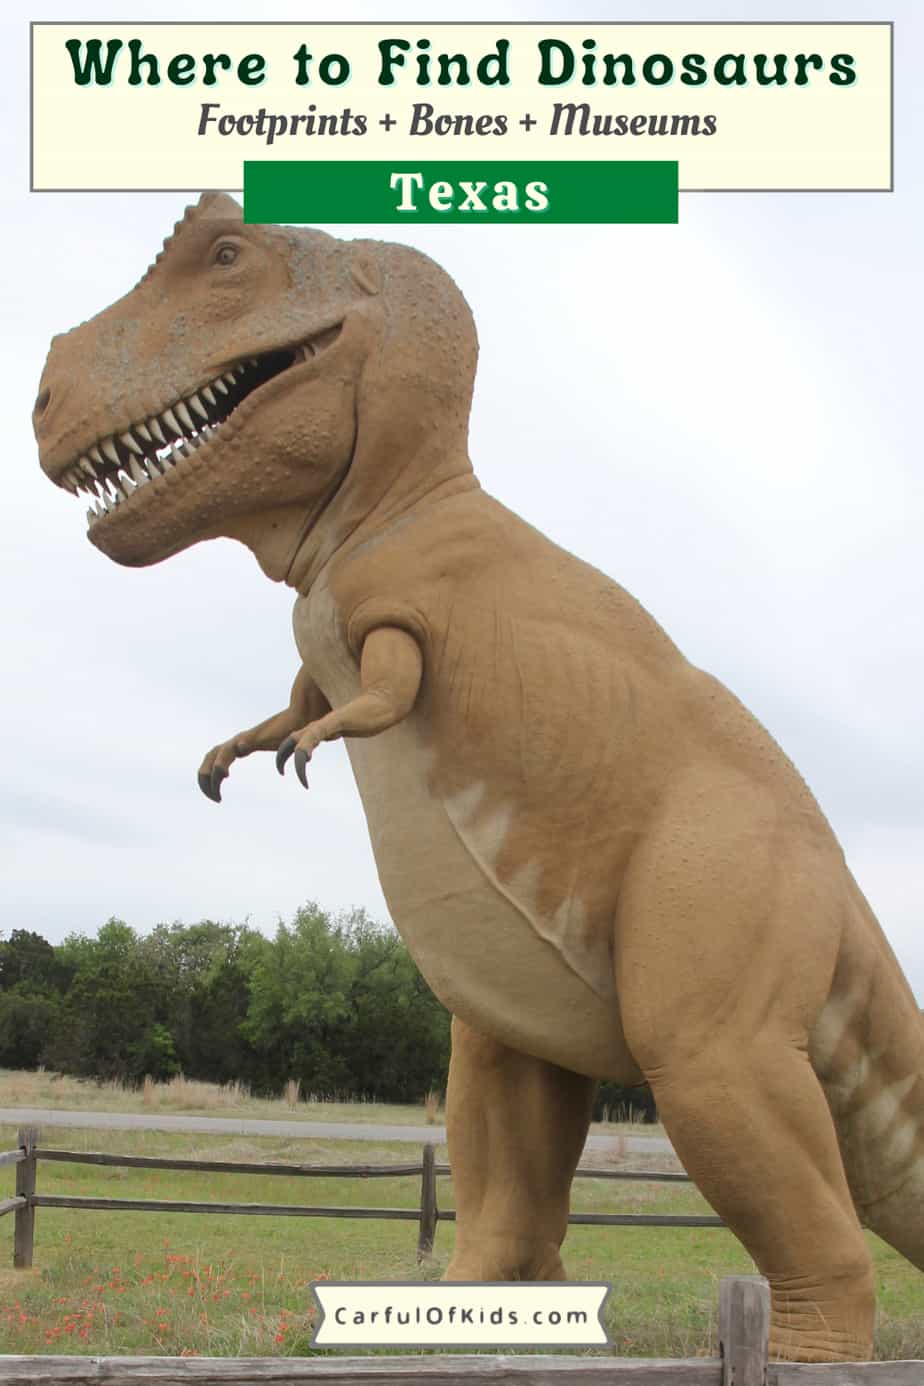 Find Dinosaurs marching across Texas from air-conditioned museums to sites that will get your feet wet. Learn about the dinosaurs of Texas and which Universities discovered dinosaurs. Where to find dinosaurs in Texas | Museums with Dinosaur exhibits in Texas | Dinosaur tracks in Texas #dinosaurs #Texas